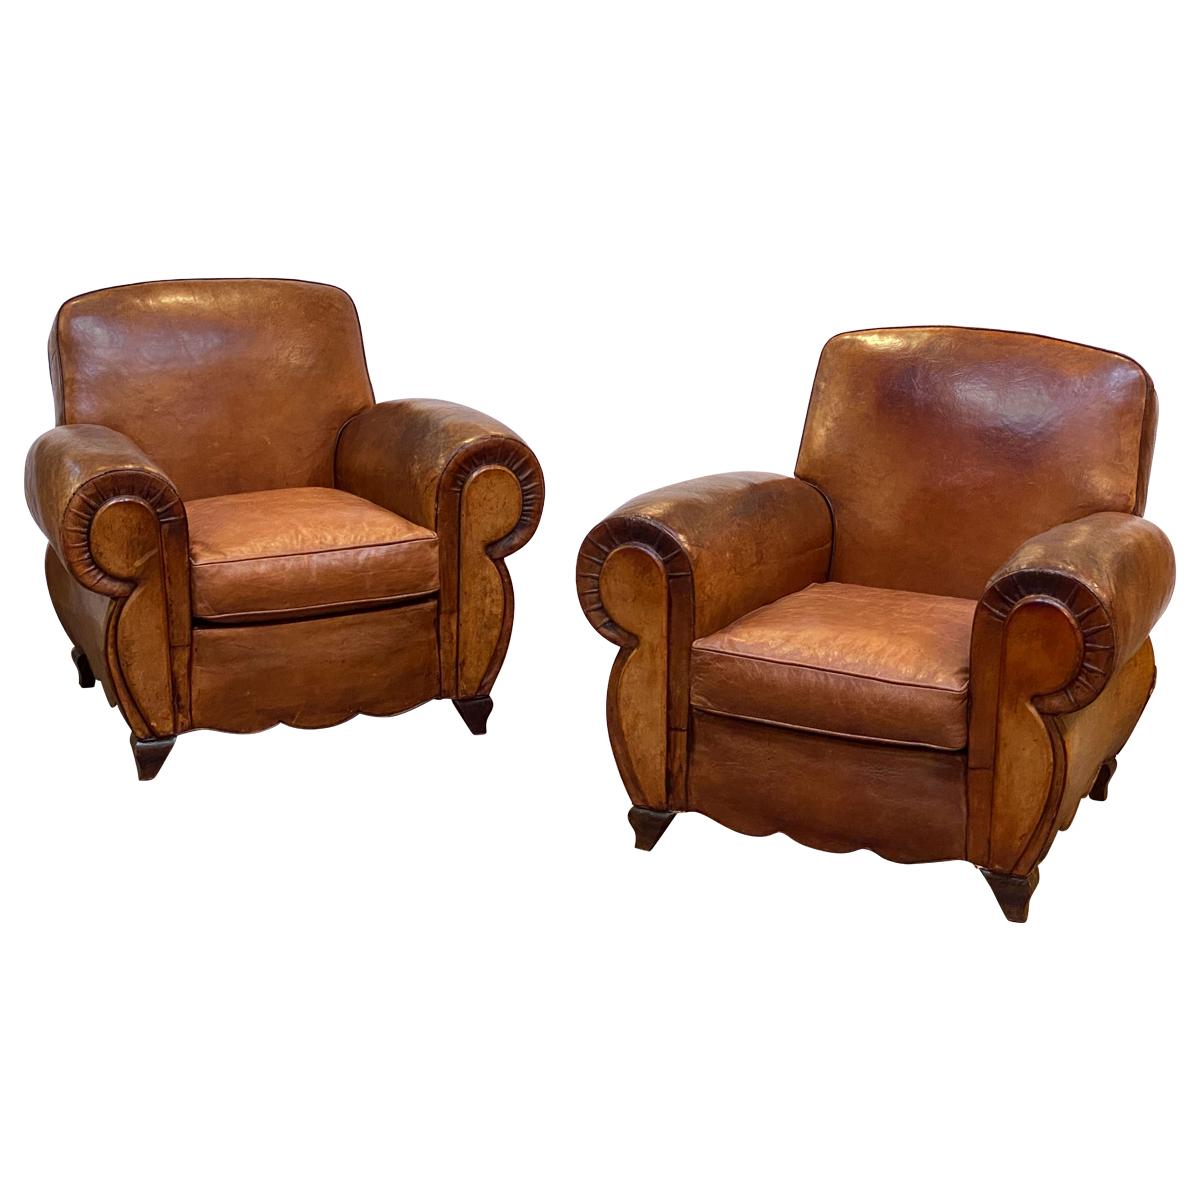 Pair of French Art Deco Leather Club Chairs 'Priced Individually'